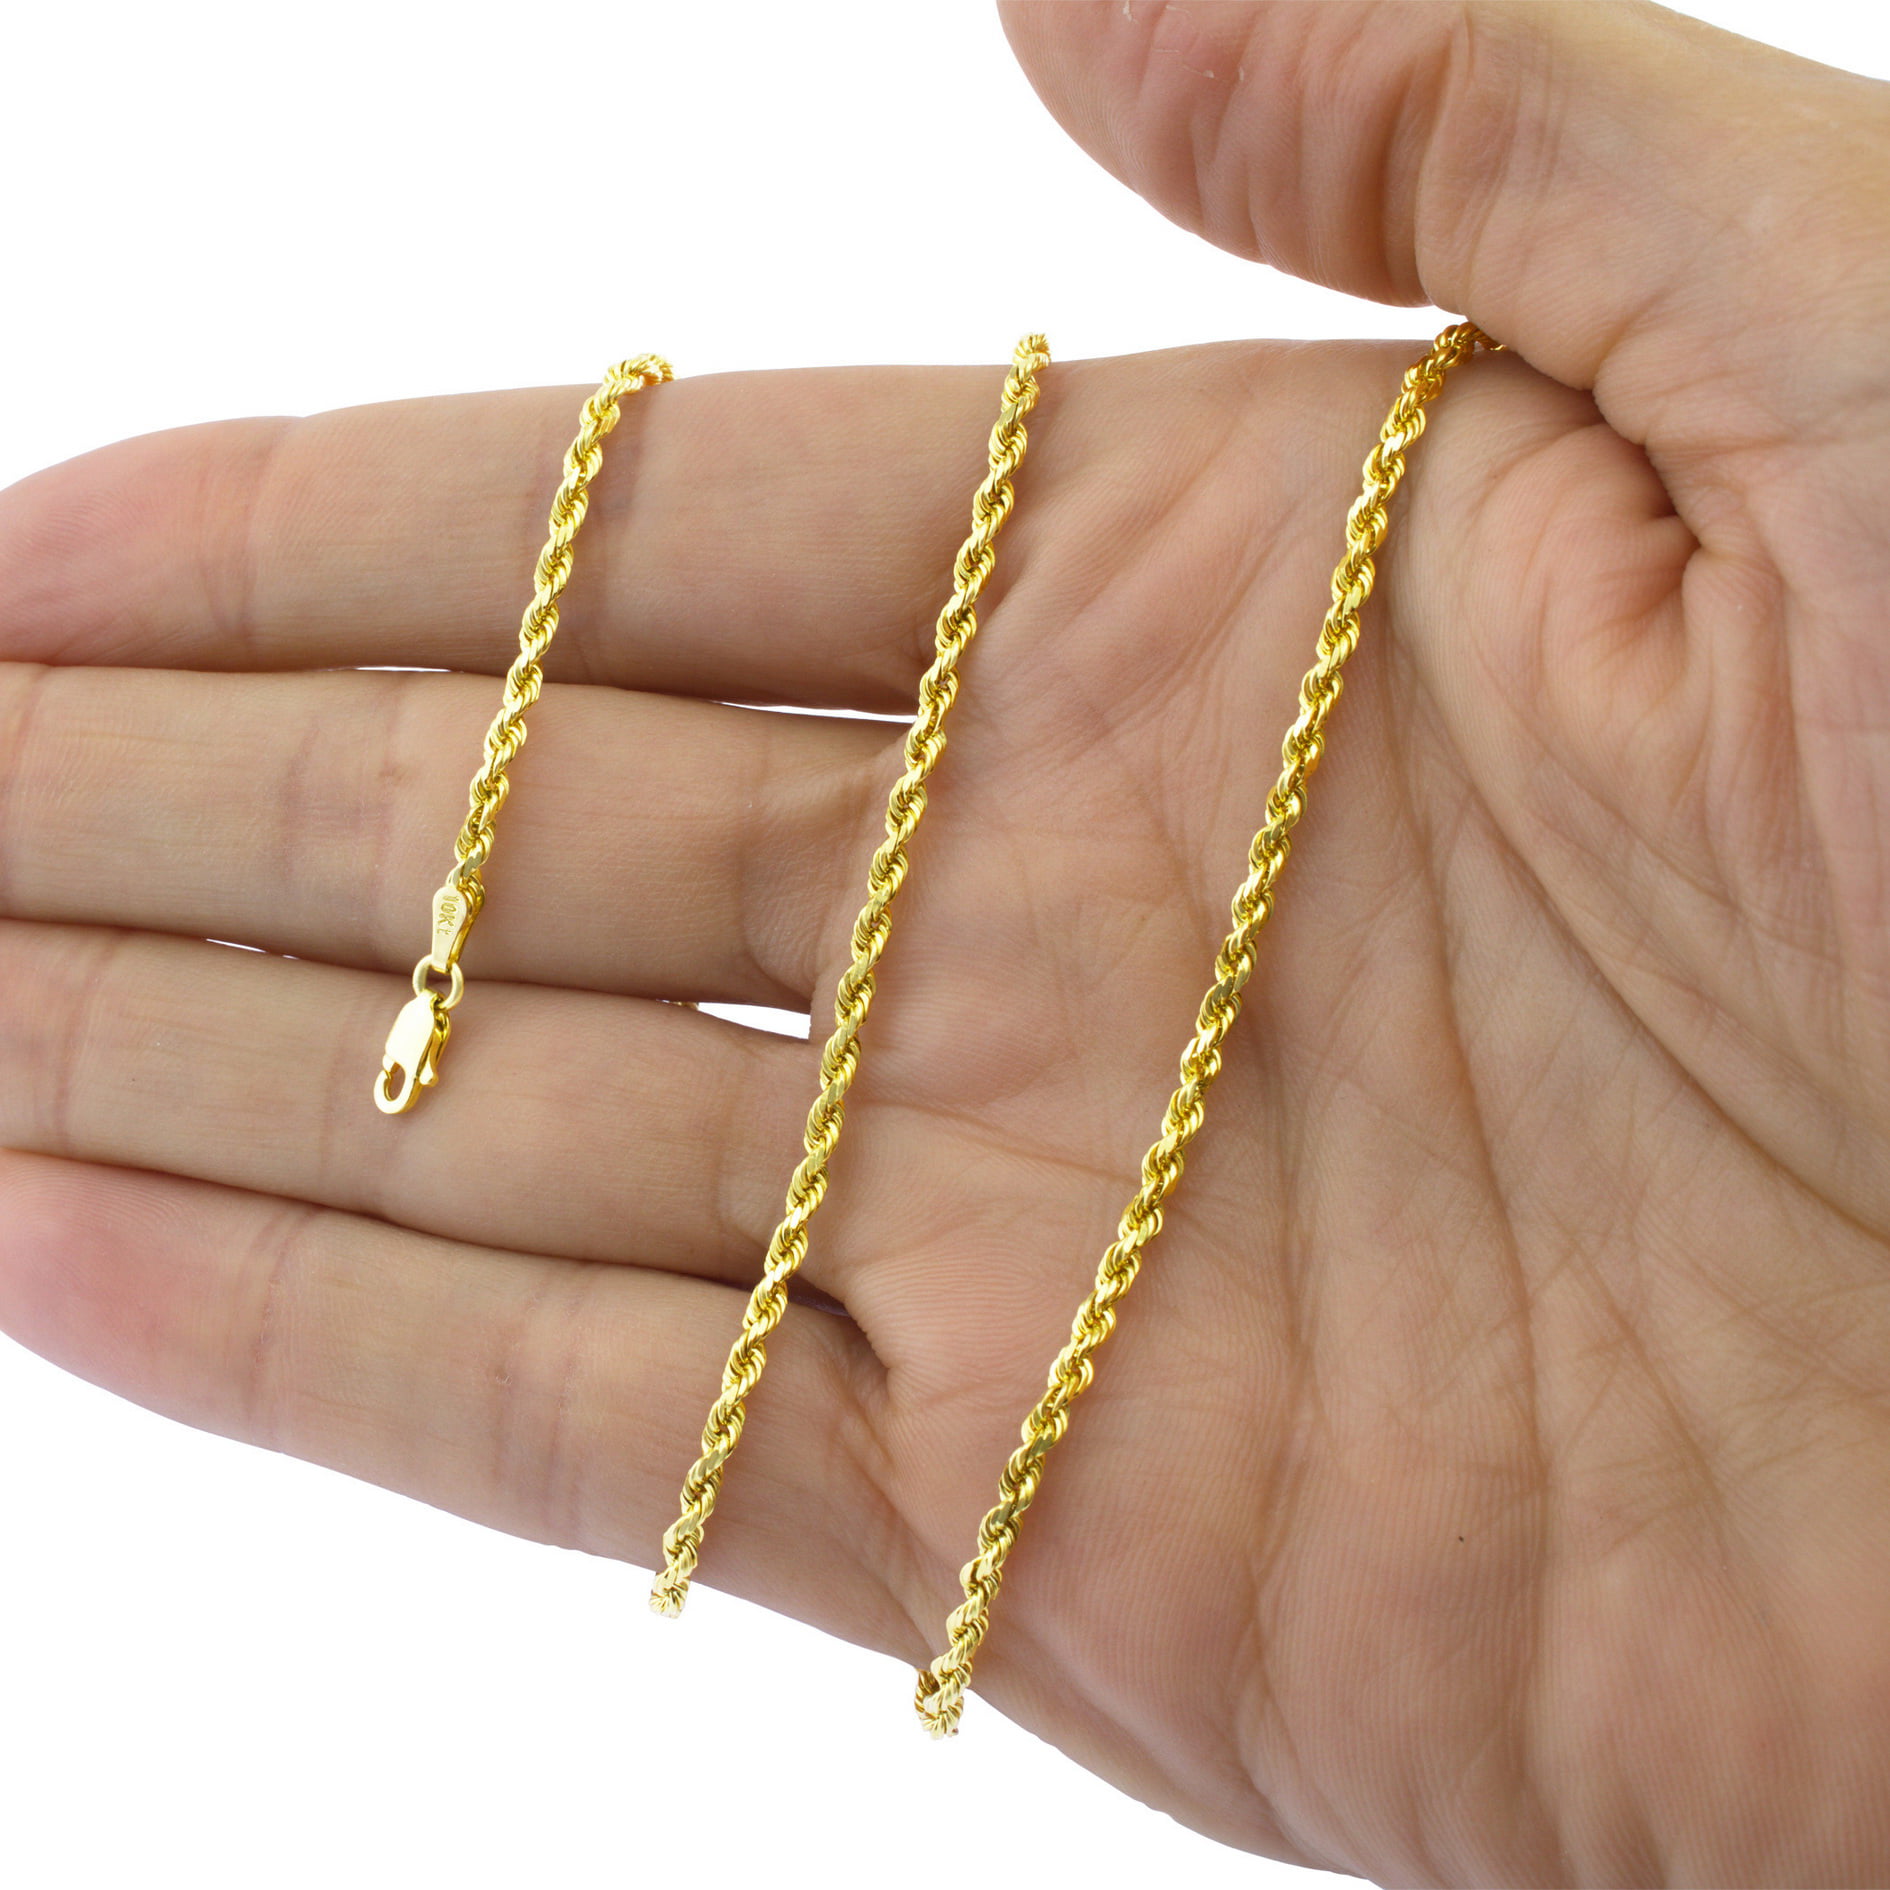 2.5mm Diamond Cut Rope Chain Necklace Extender Pendant Real 10K Yellow Gold 